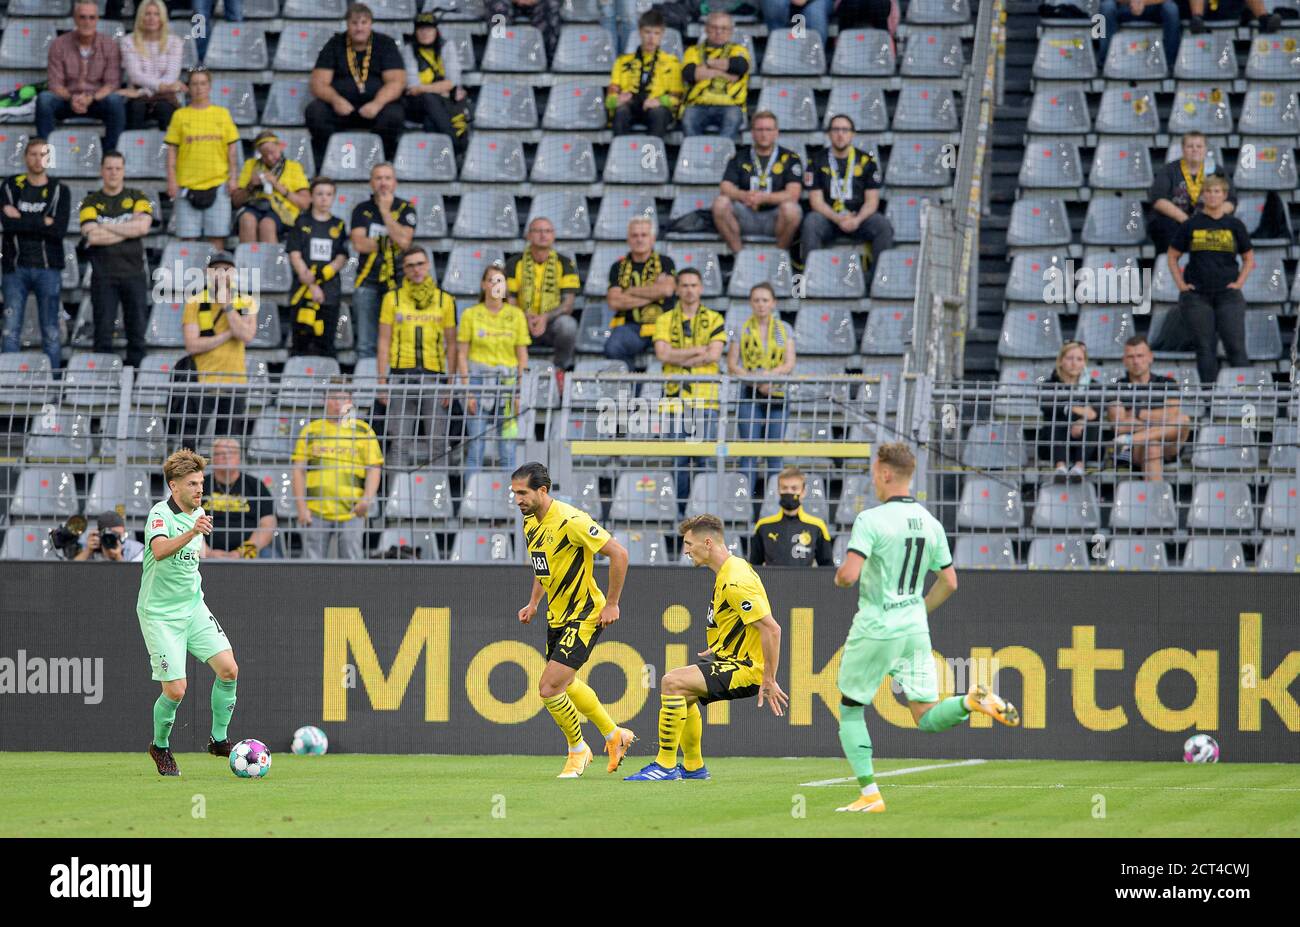 Feature, action in front of the fans on the Suedtribuene who keep their distance, left to right Jonas HOFMANN (MG), Emre CAN (DO), Thomas MEUNIER (DO), Hannes WOLF (MG), Soccer 1st Bundesliga, 1st matchday, Borussia Dortmund (DO) - Borussia Monchengladbach (MG) 3: 0, on September 19, 2020 in Dortmund/Germany. Â | usage worldwide Stock Photo